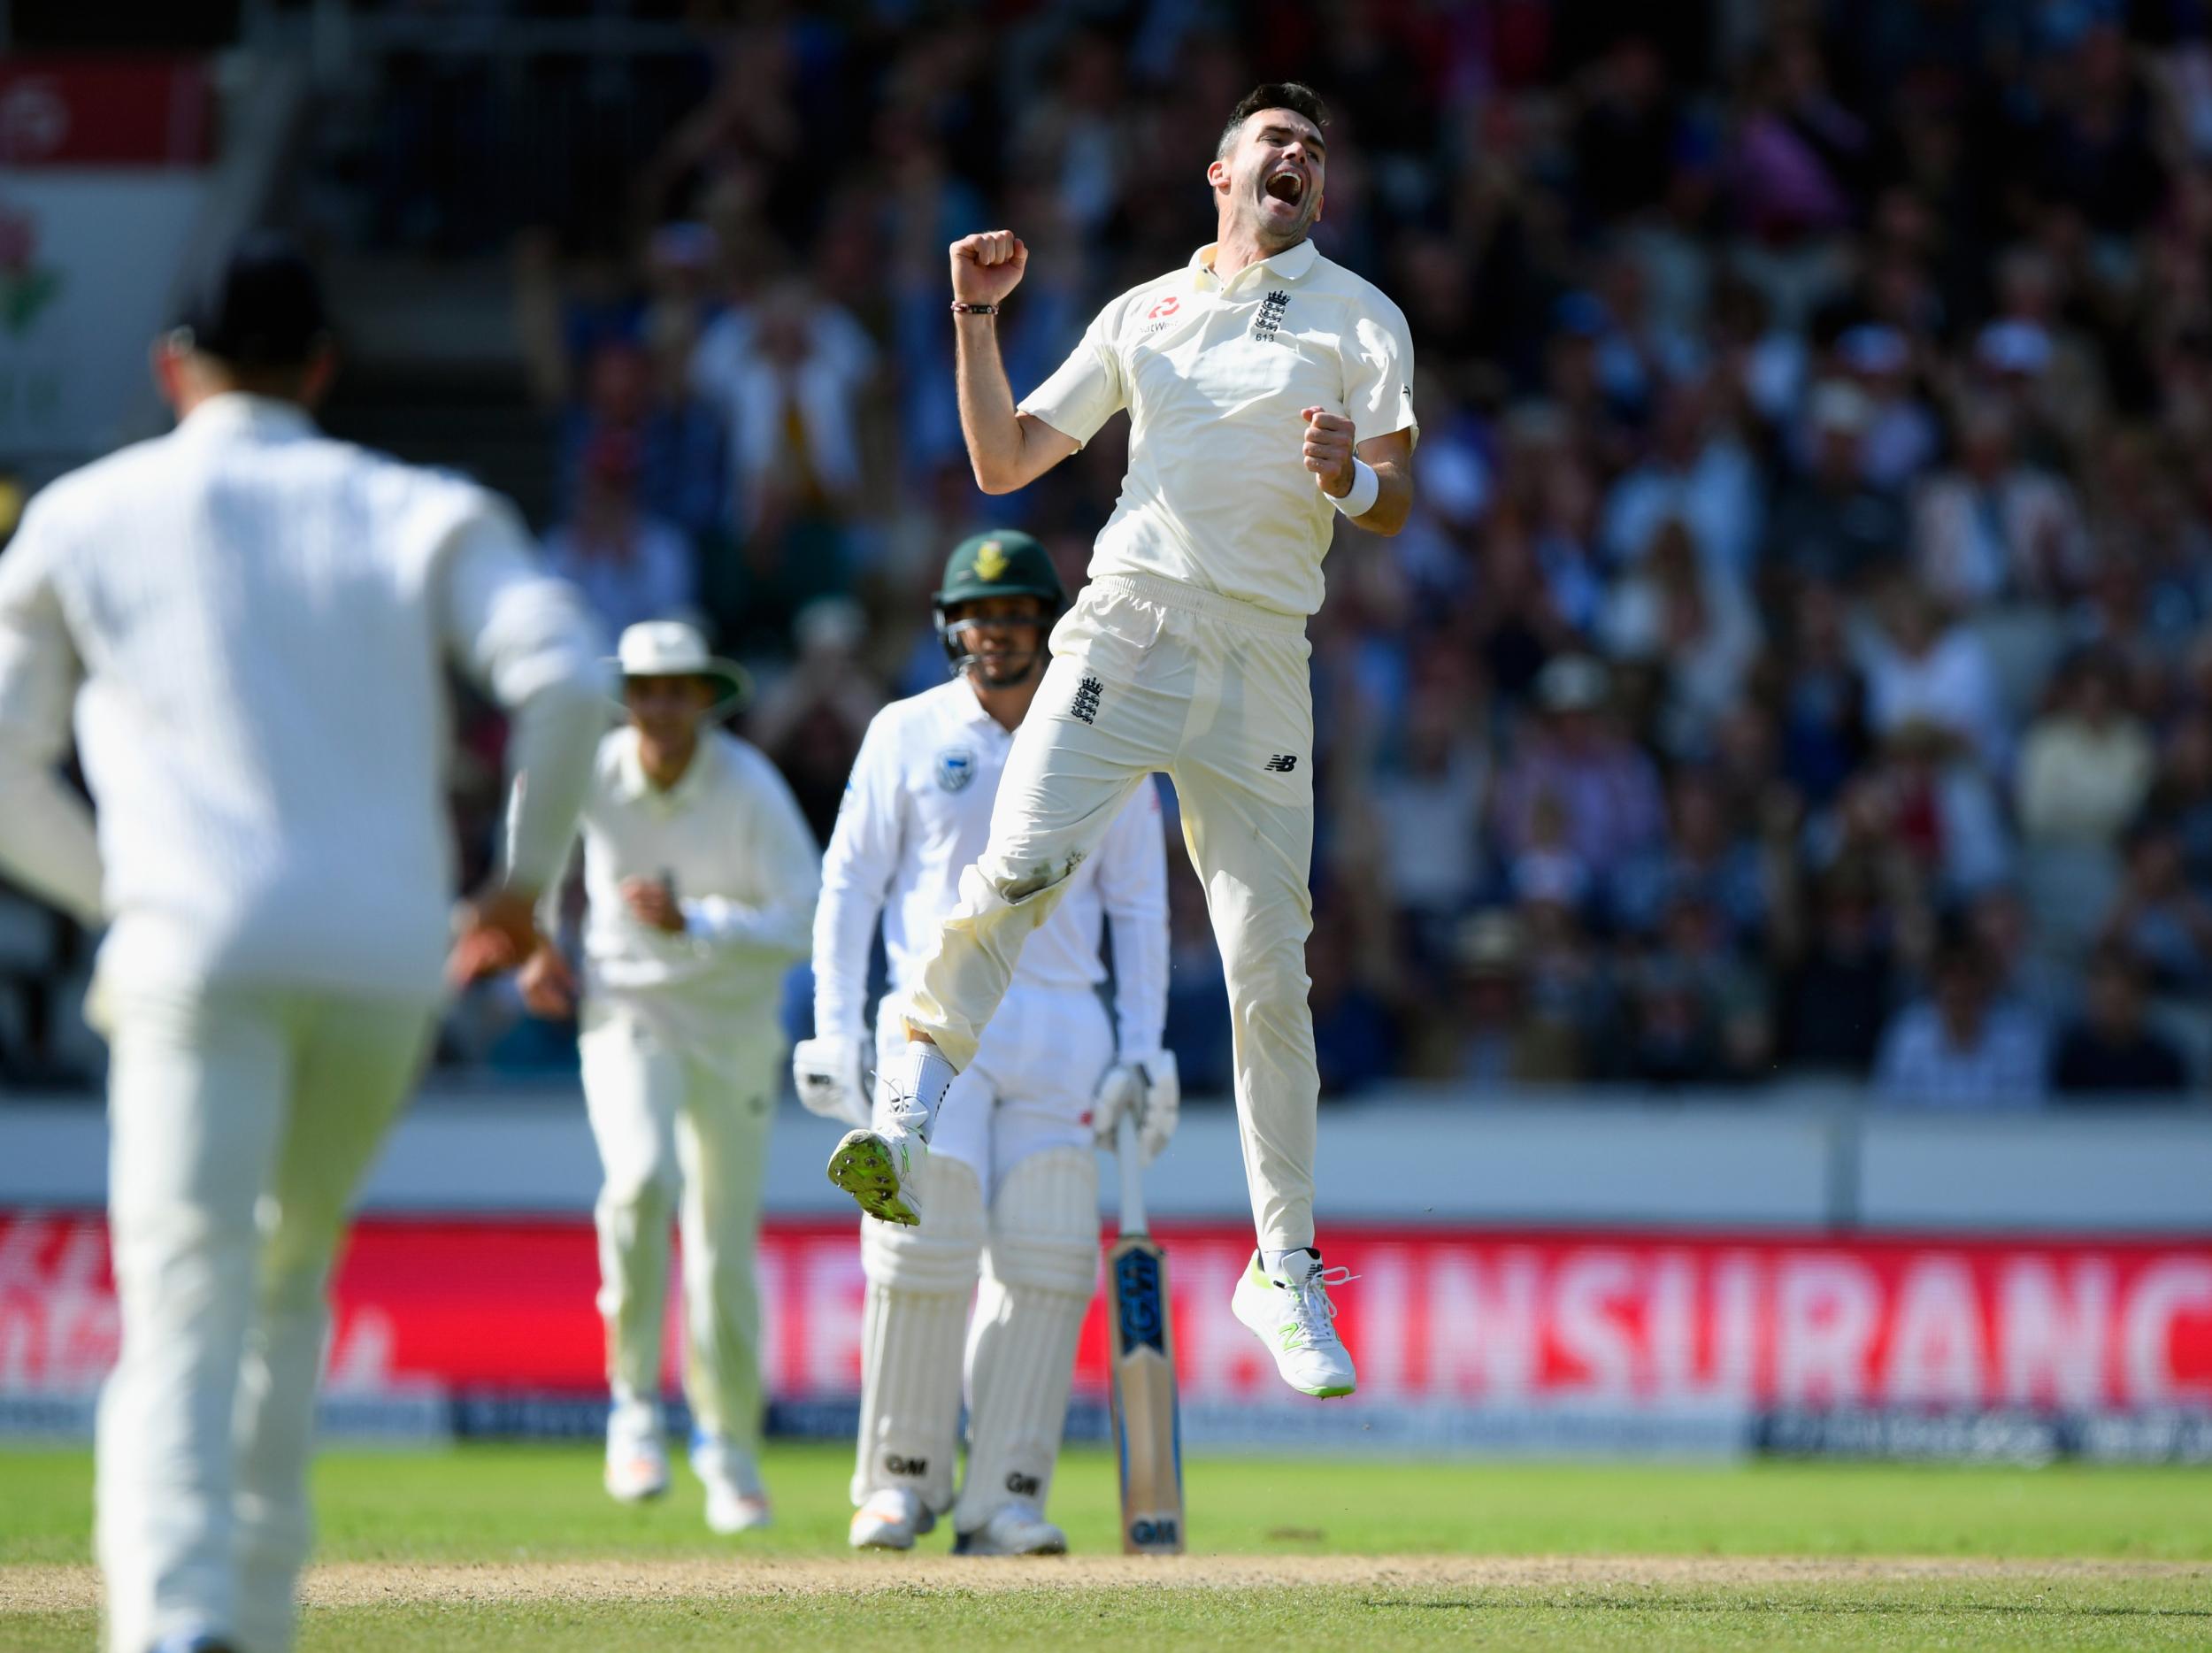 Anderson was in superb form on the second day of the final Test